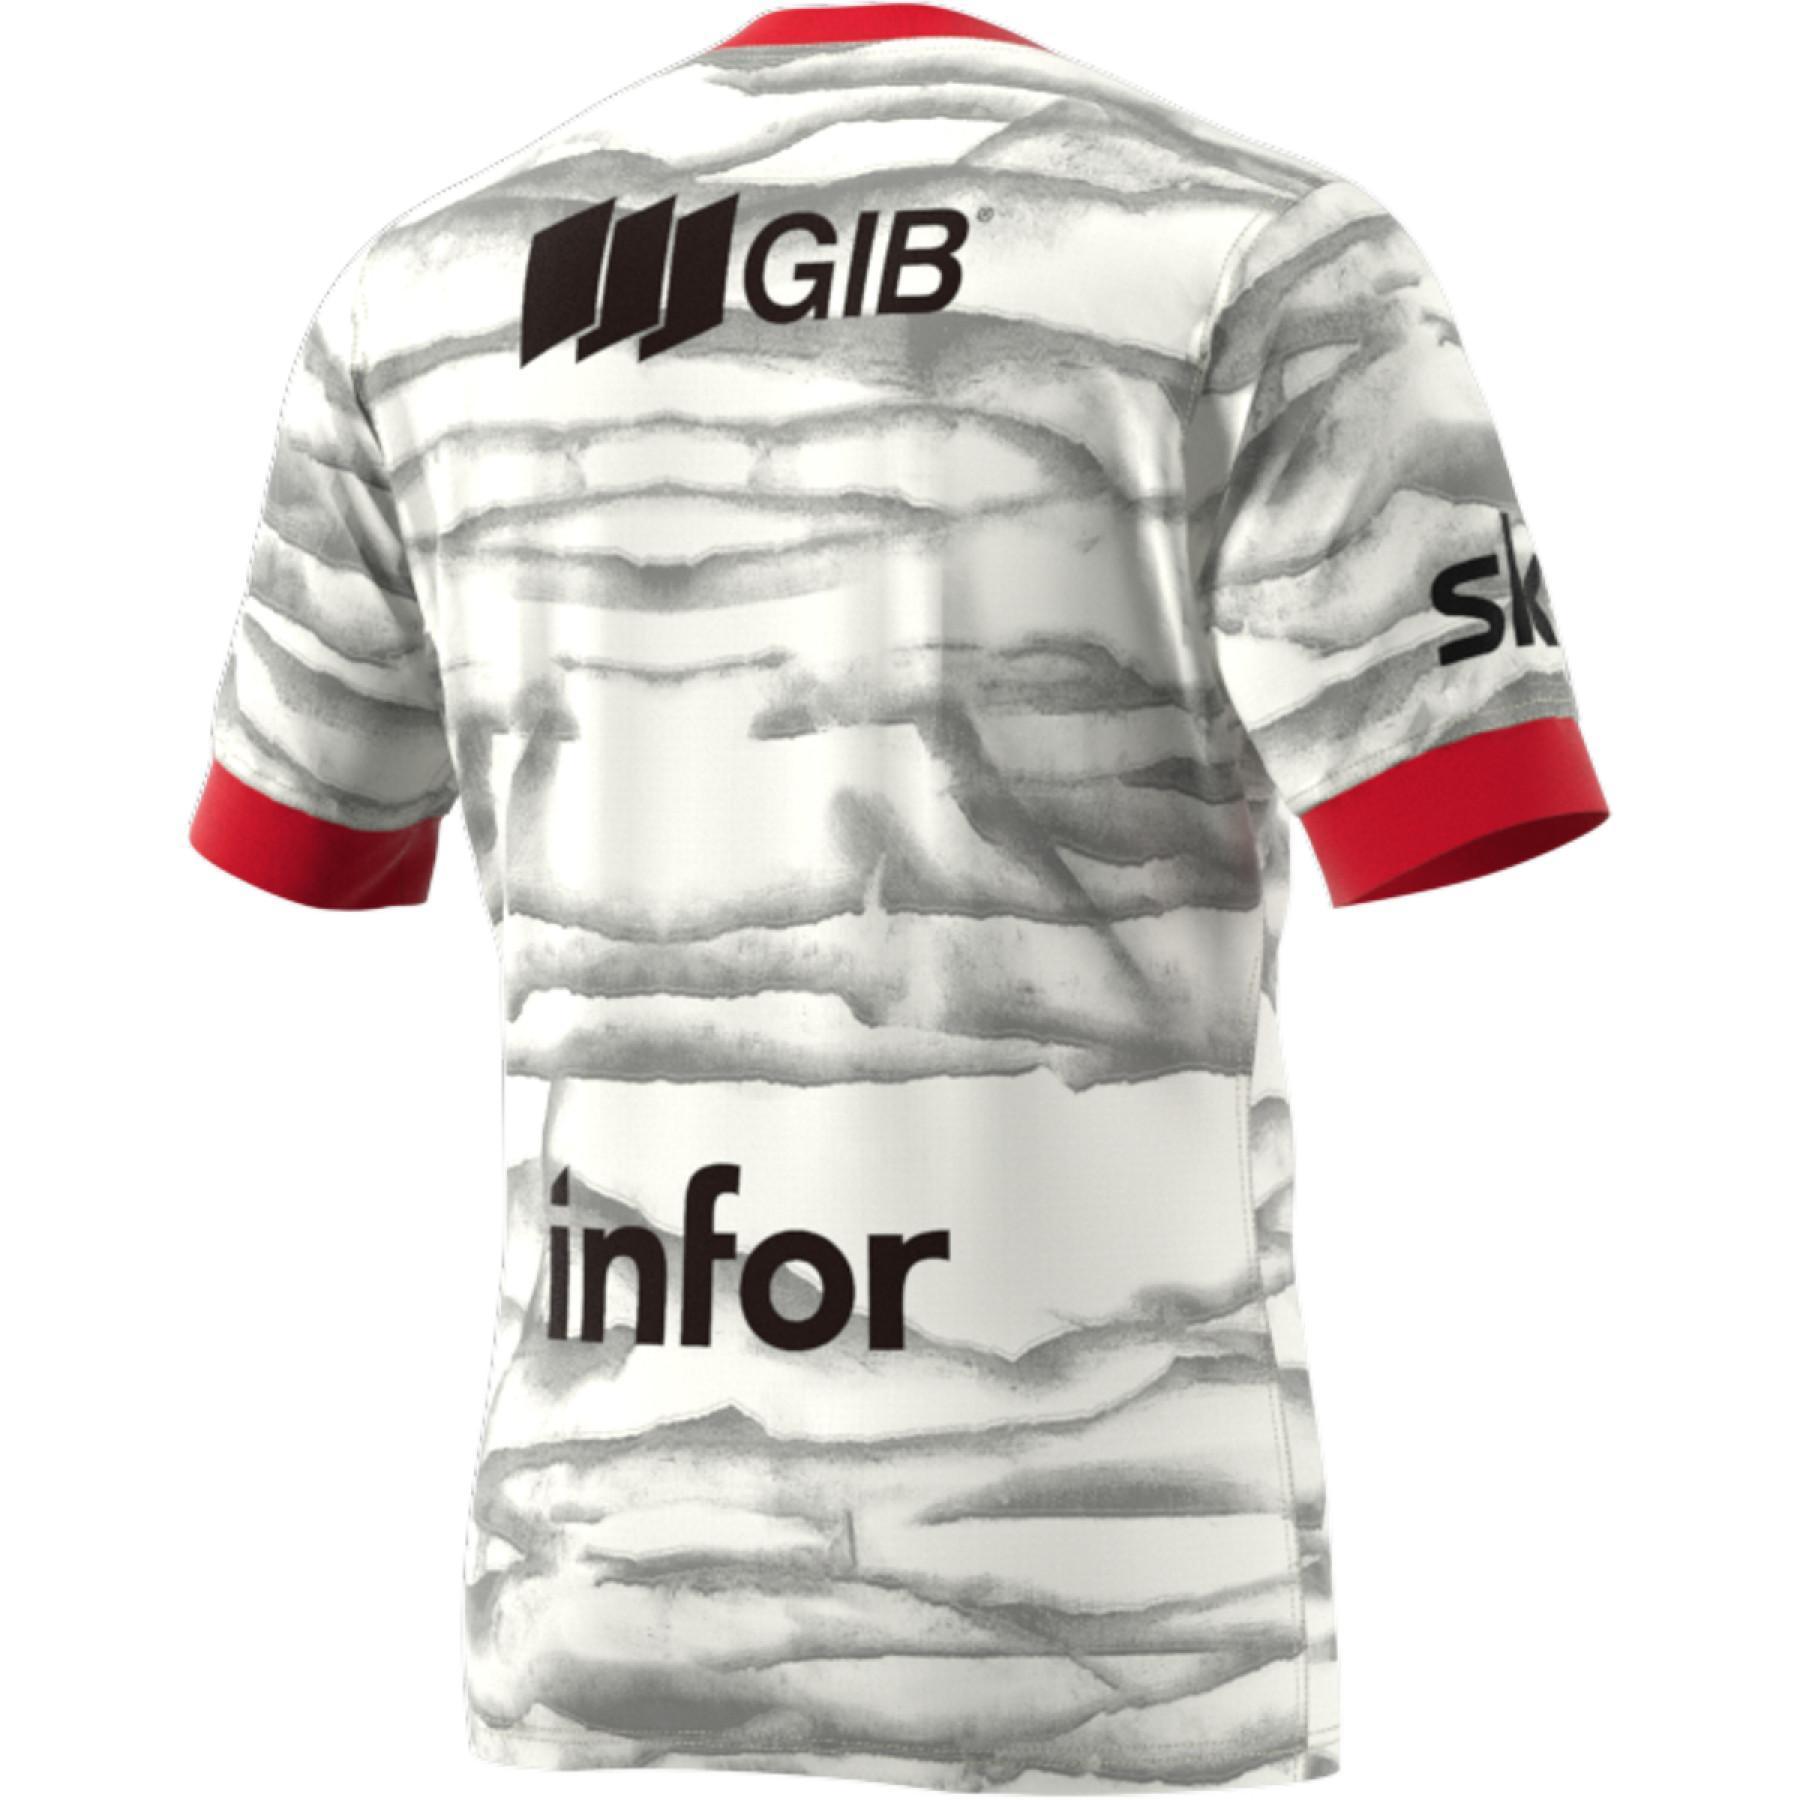 Maillot adidas Crusaders Rugby Alternate Replica